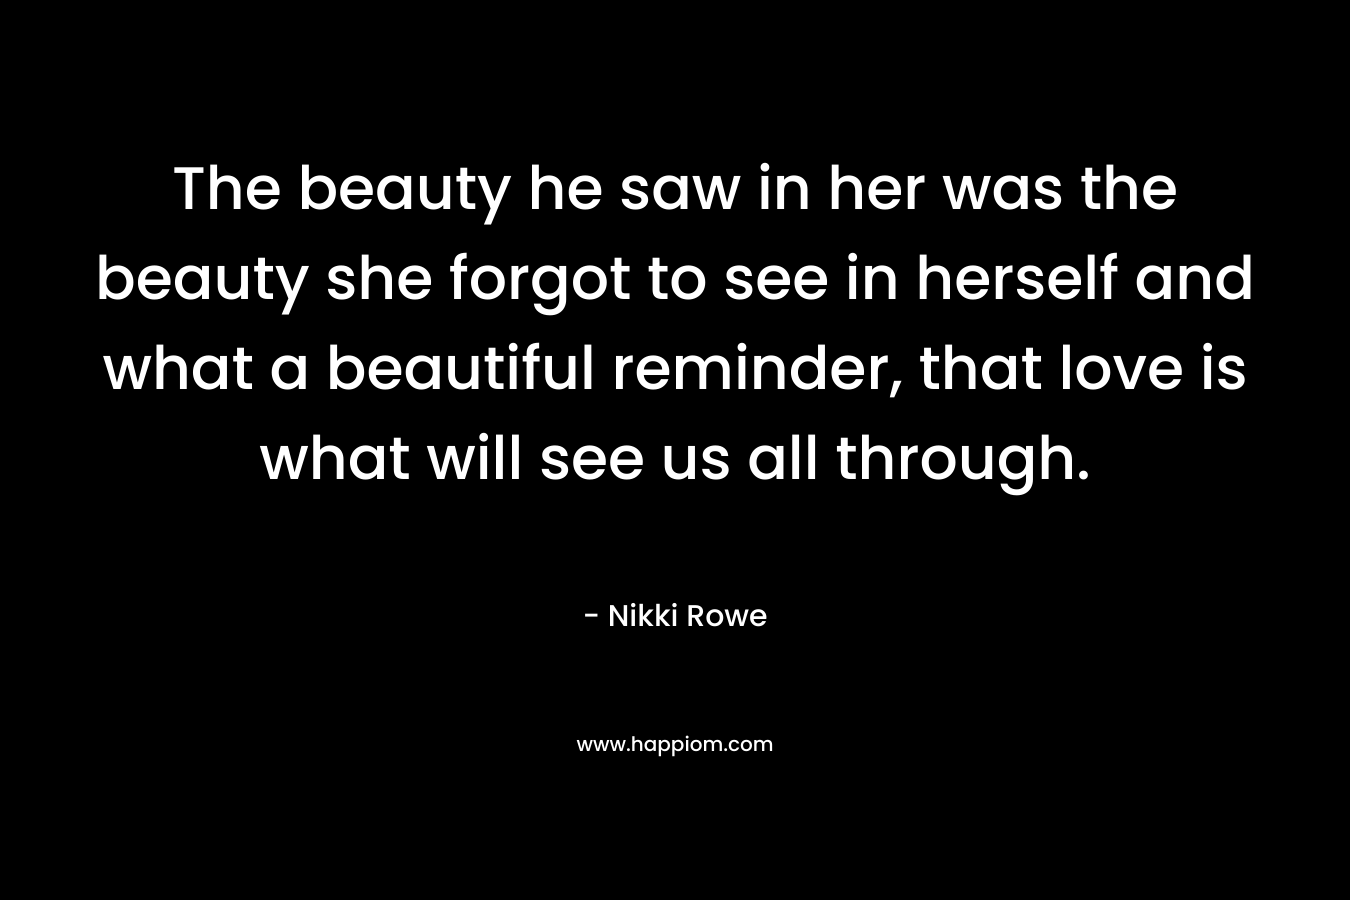 The beauty he saw in her was the beauty she forgot to see in herself and what a beautiful reminder, that love is what will see us all through.